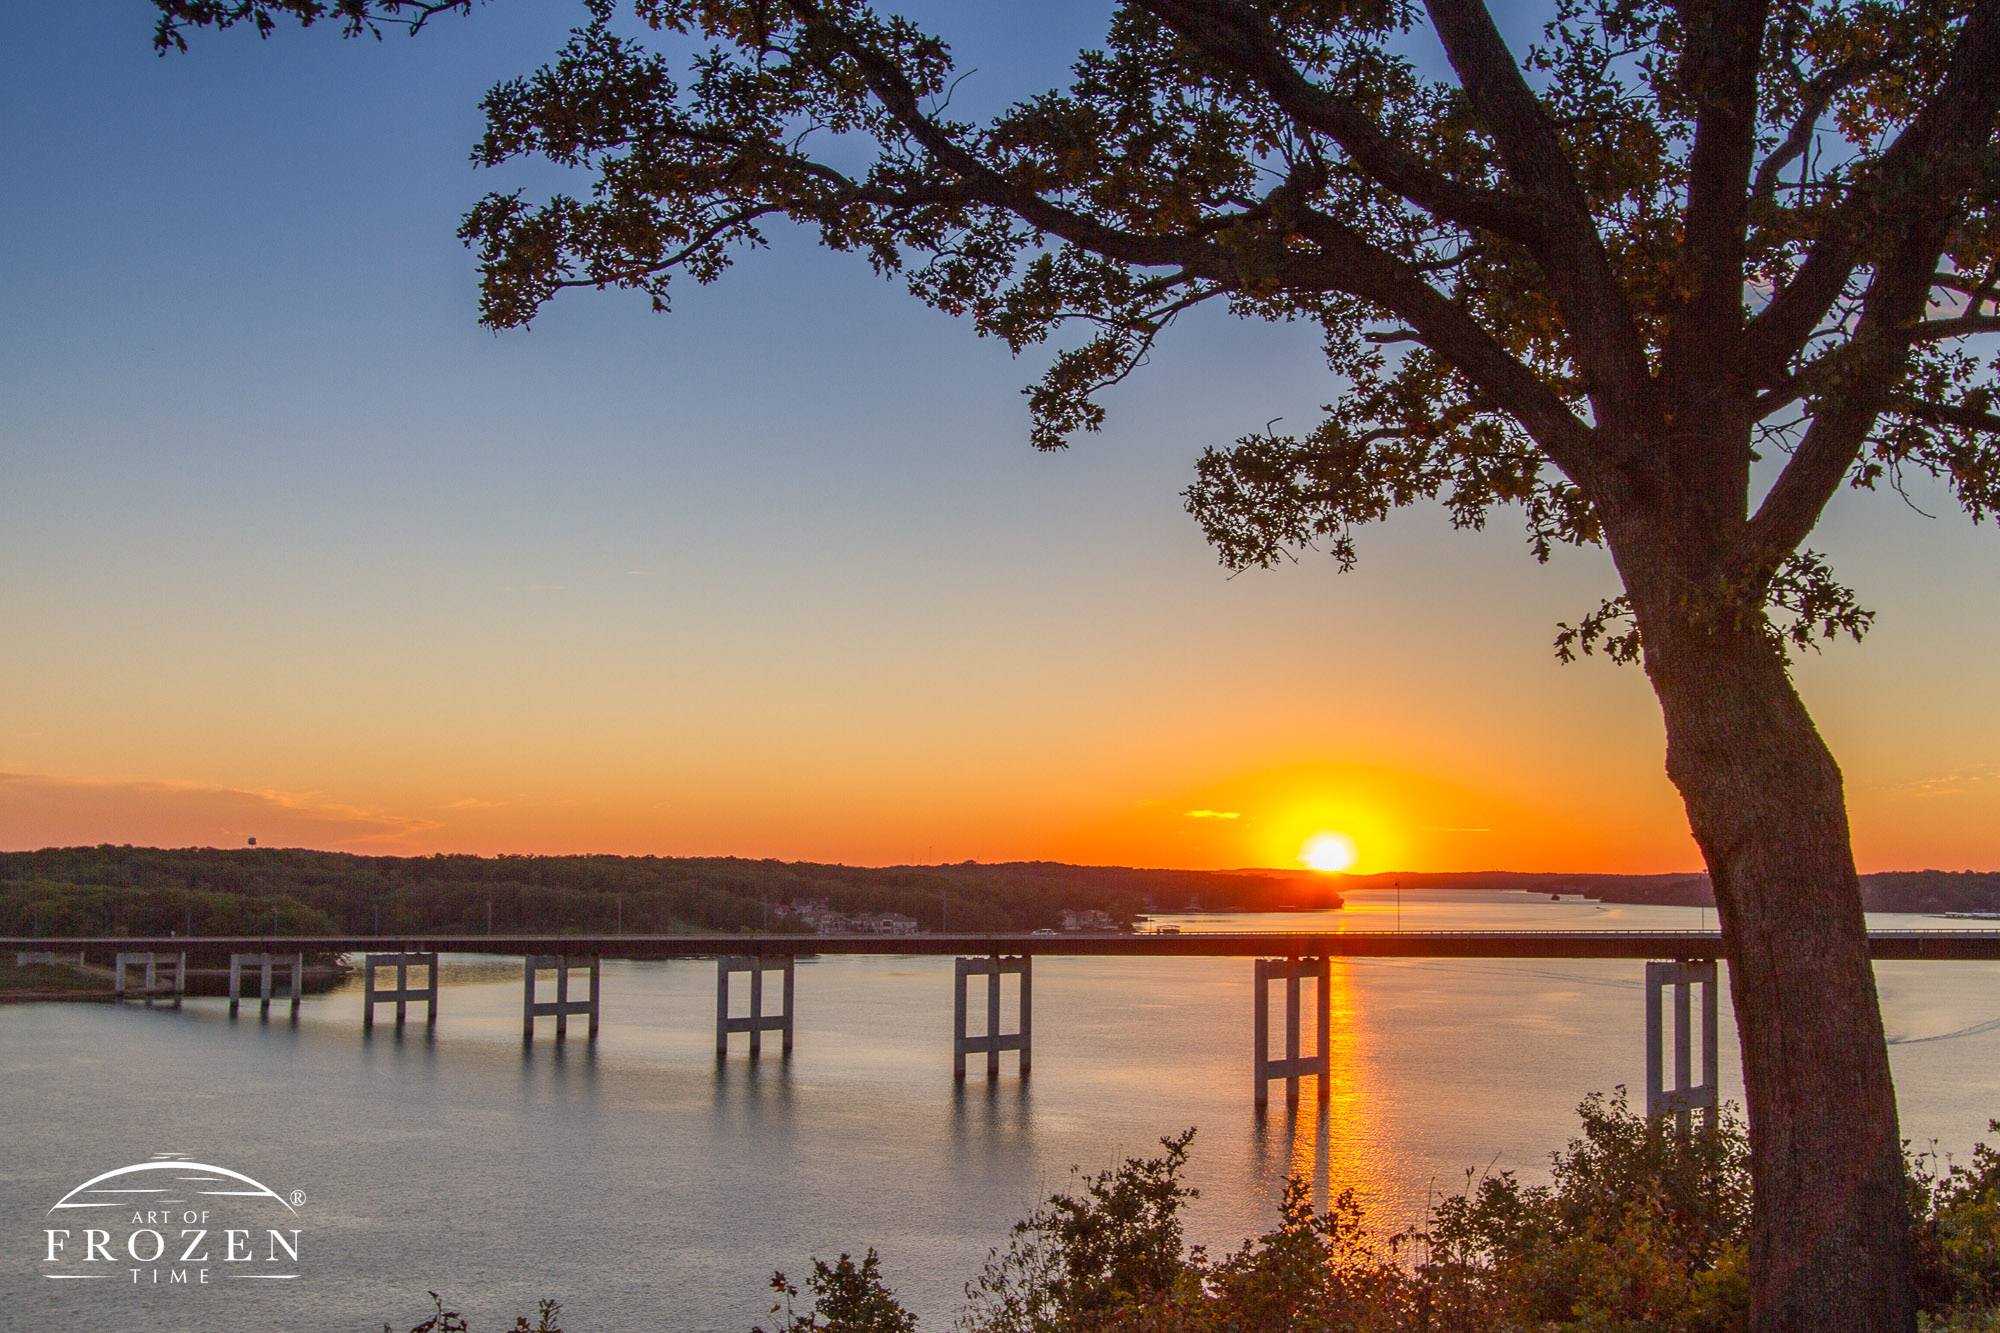 A sunset image where the Lake of the Ozarks Community Bridge and an oak tree serve as silhouettes to a golden Missouri sunset